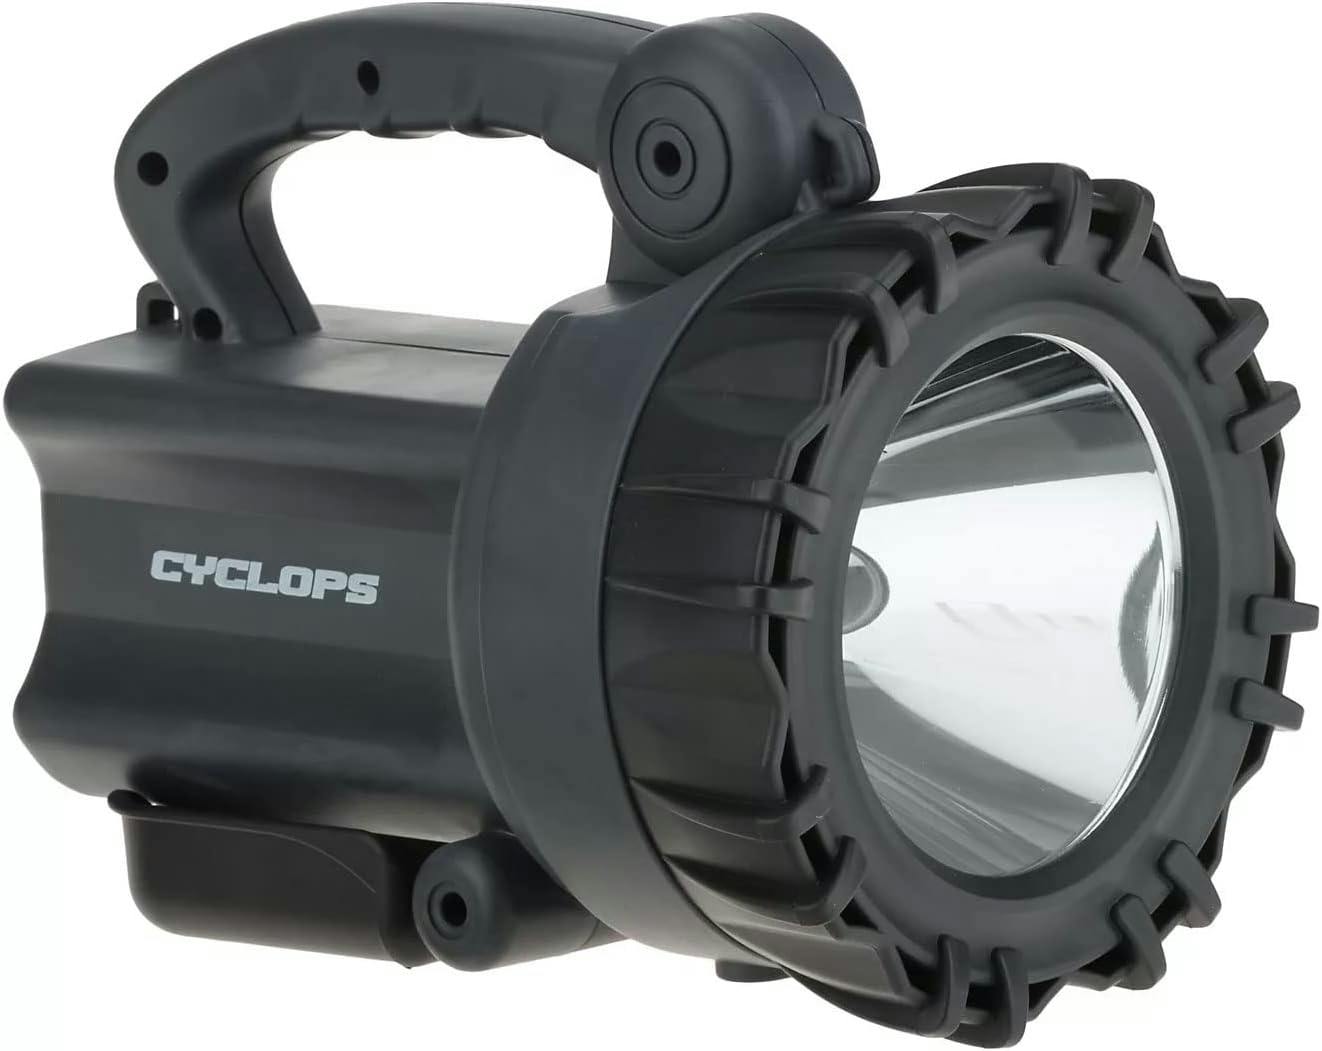 Compact Dual-Rechargeable 850-Lumen LED Tactical Spotlight in Black